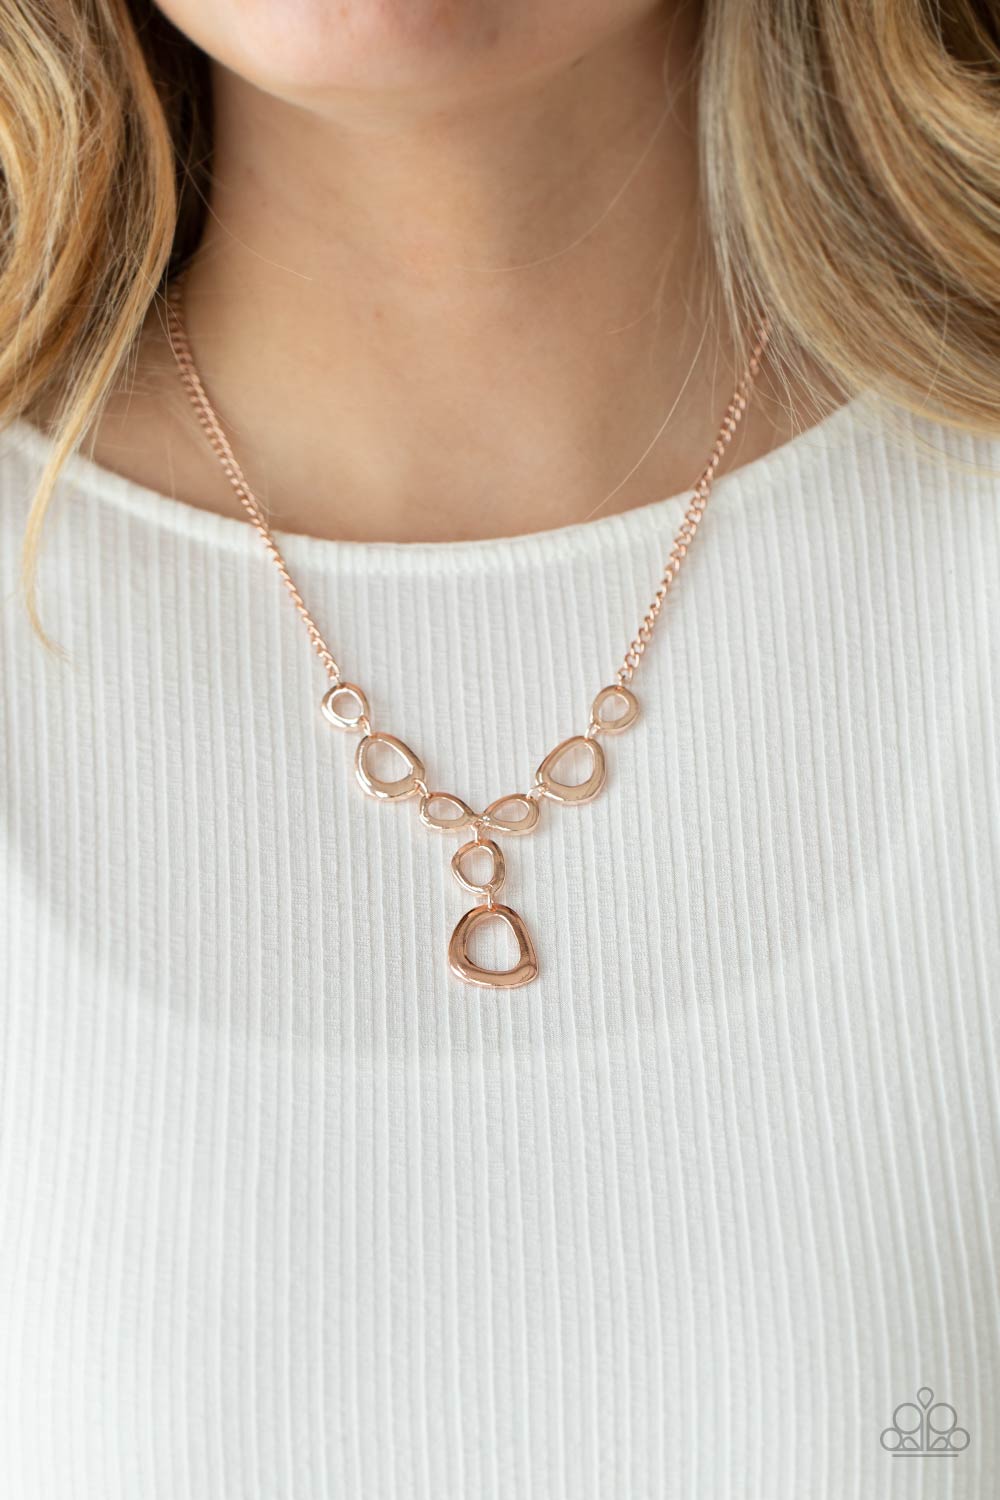 So Mod - Rose Gold Necklace - Paparazzi Accessories